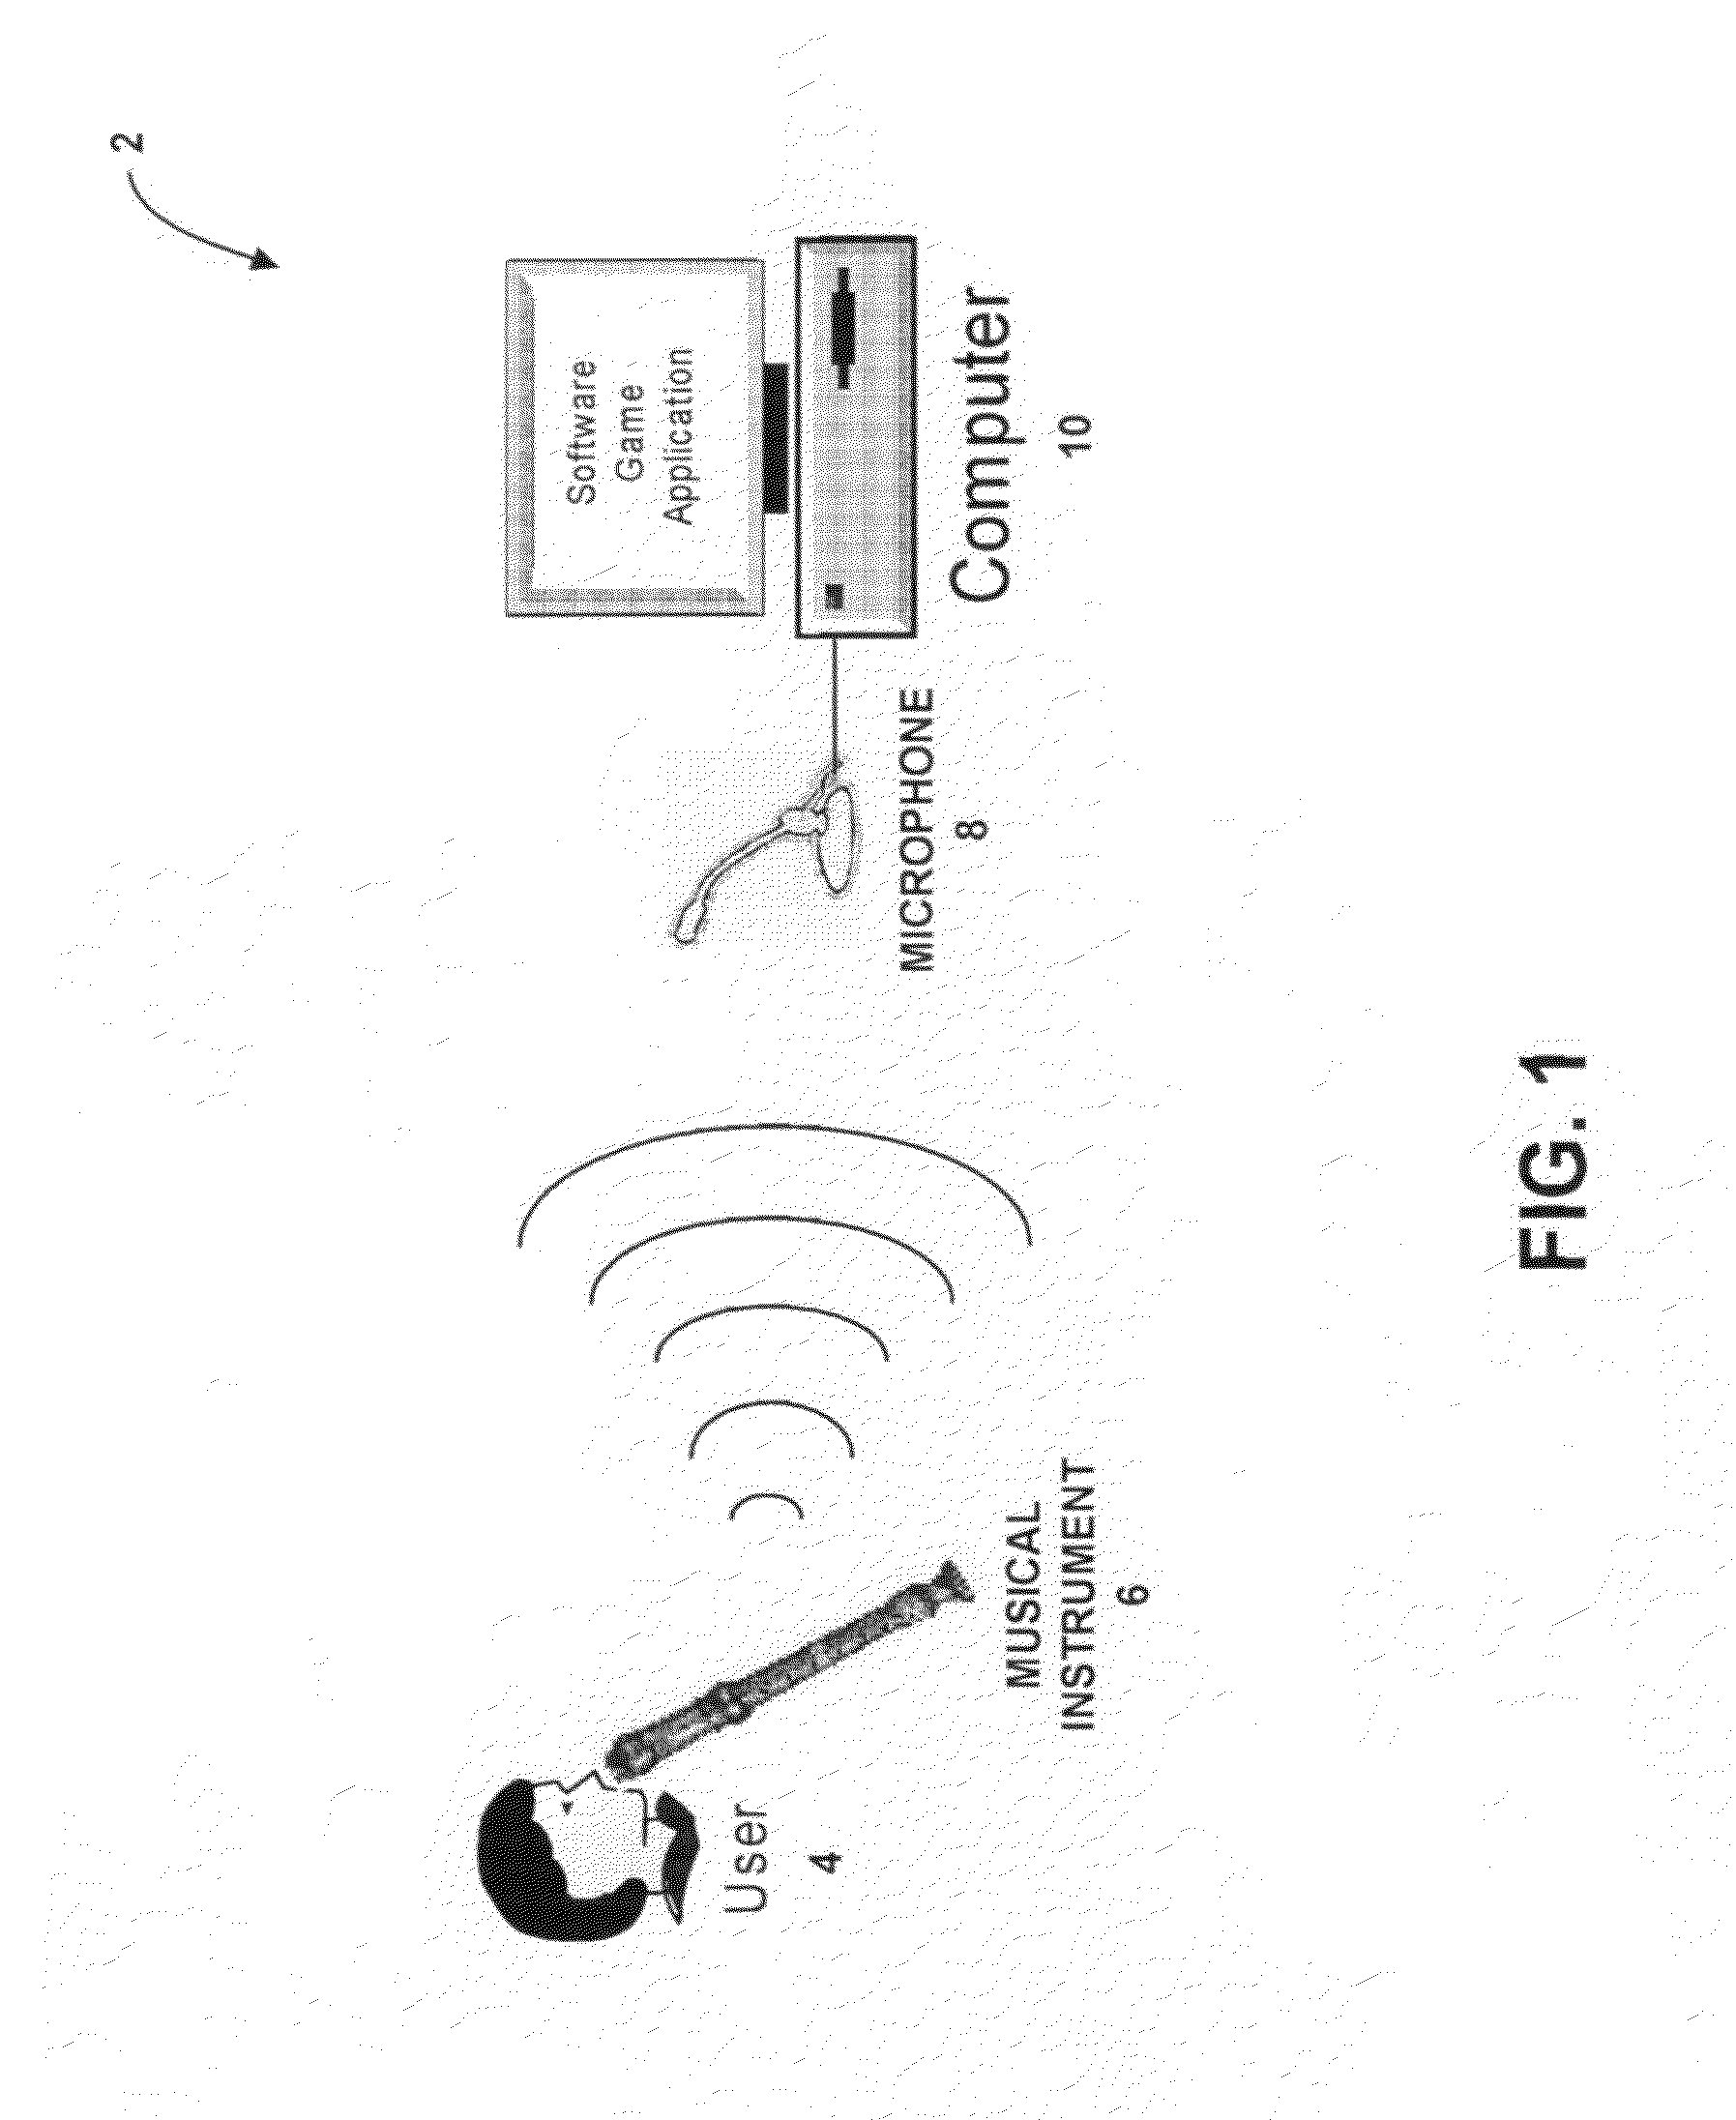 System and method for improving musical education